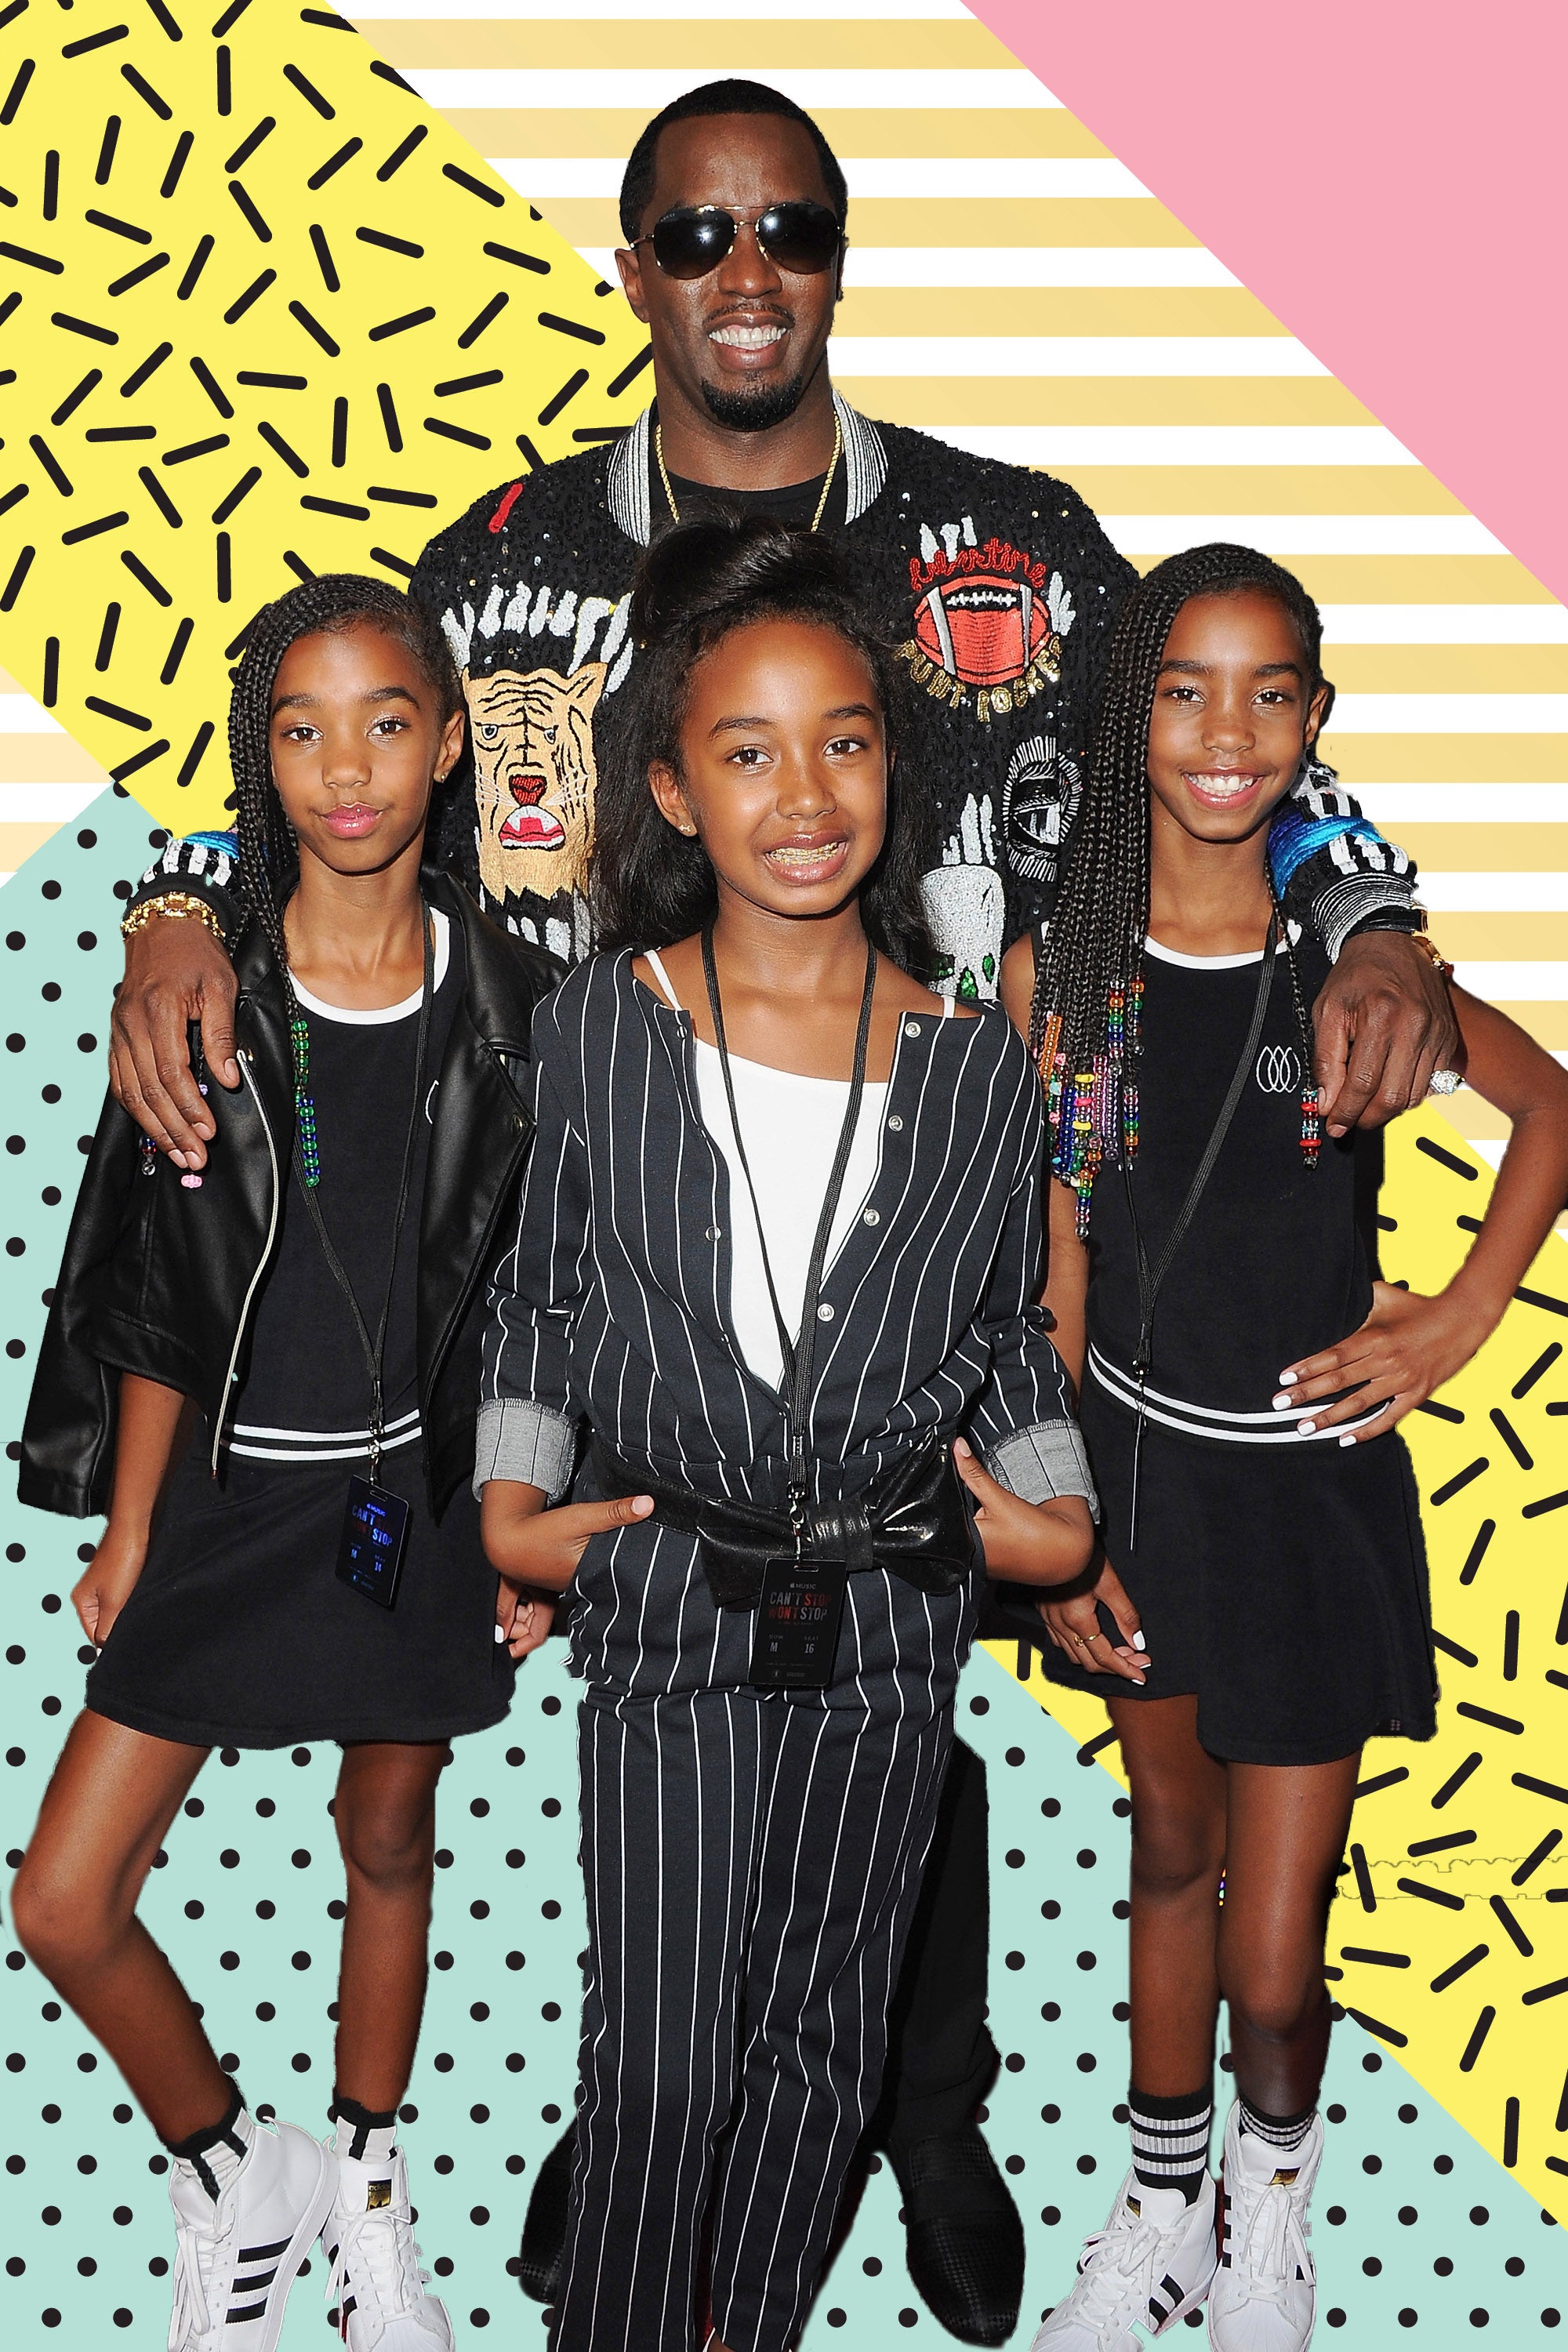 Diddy Is The Personal Hype Man To His Daughters In This Adorable Video
